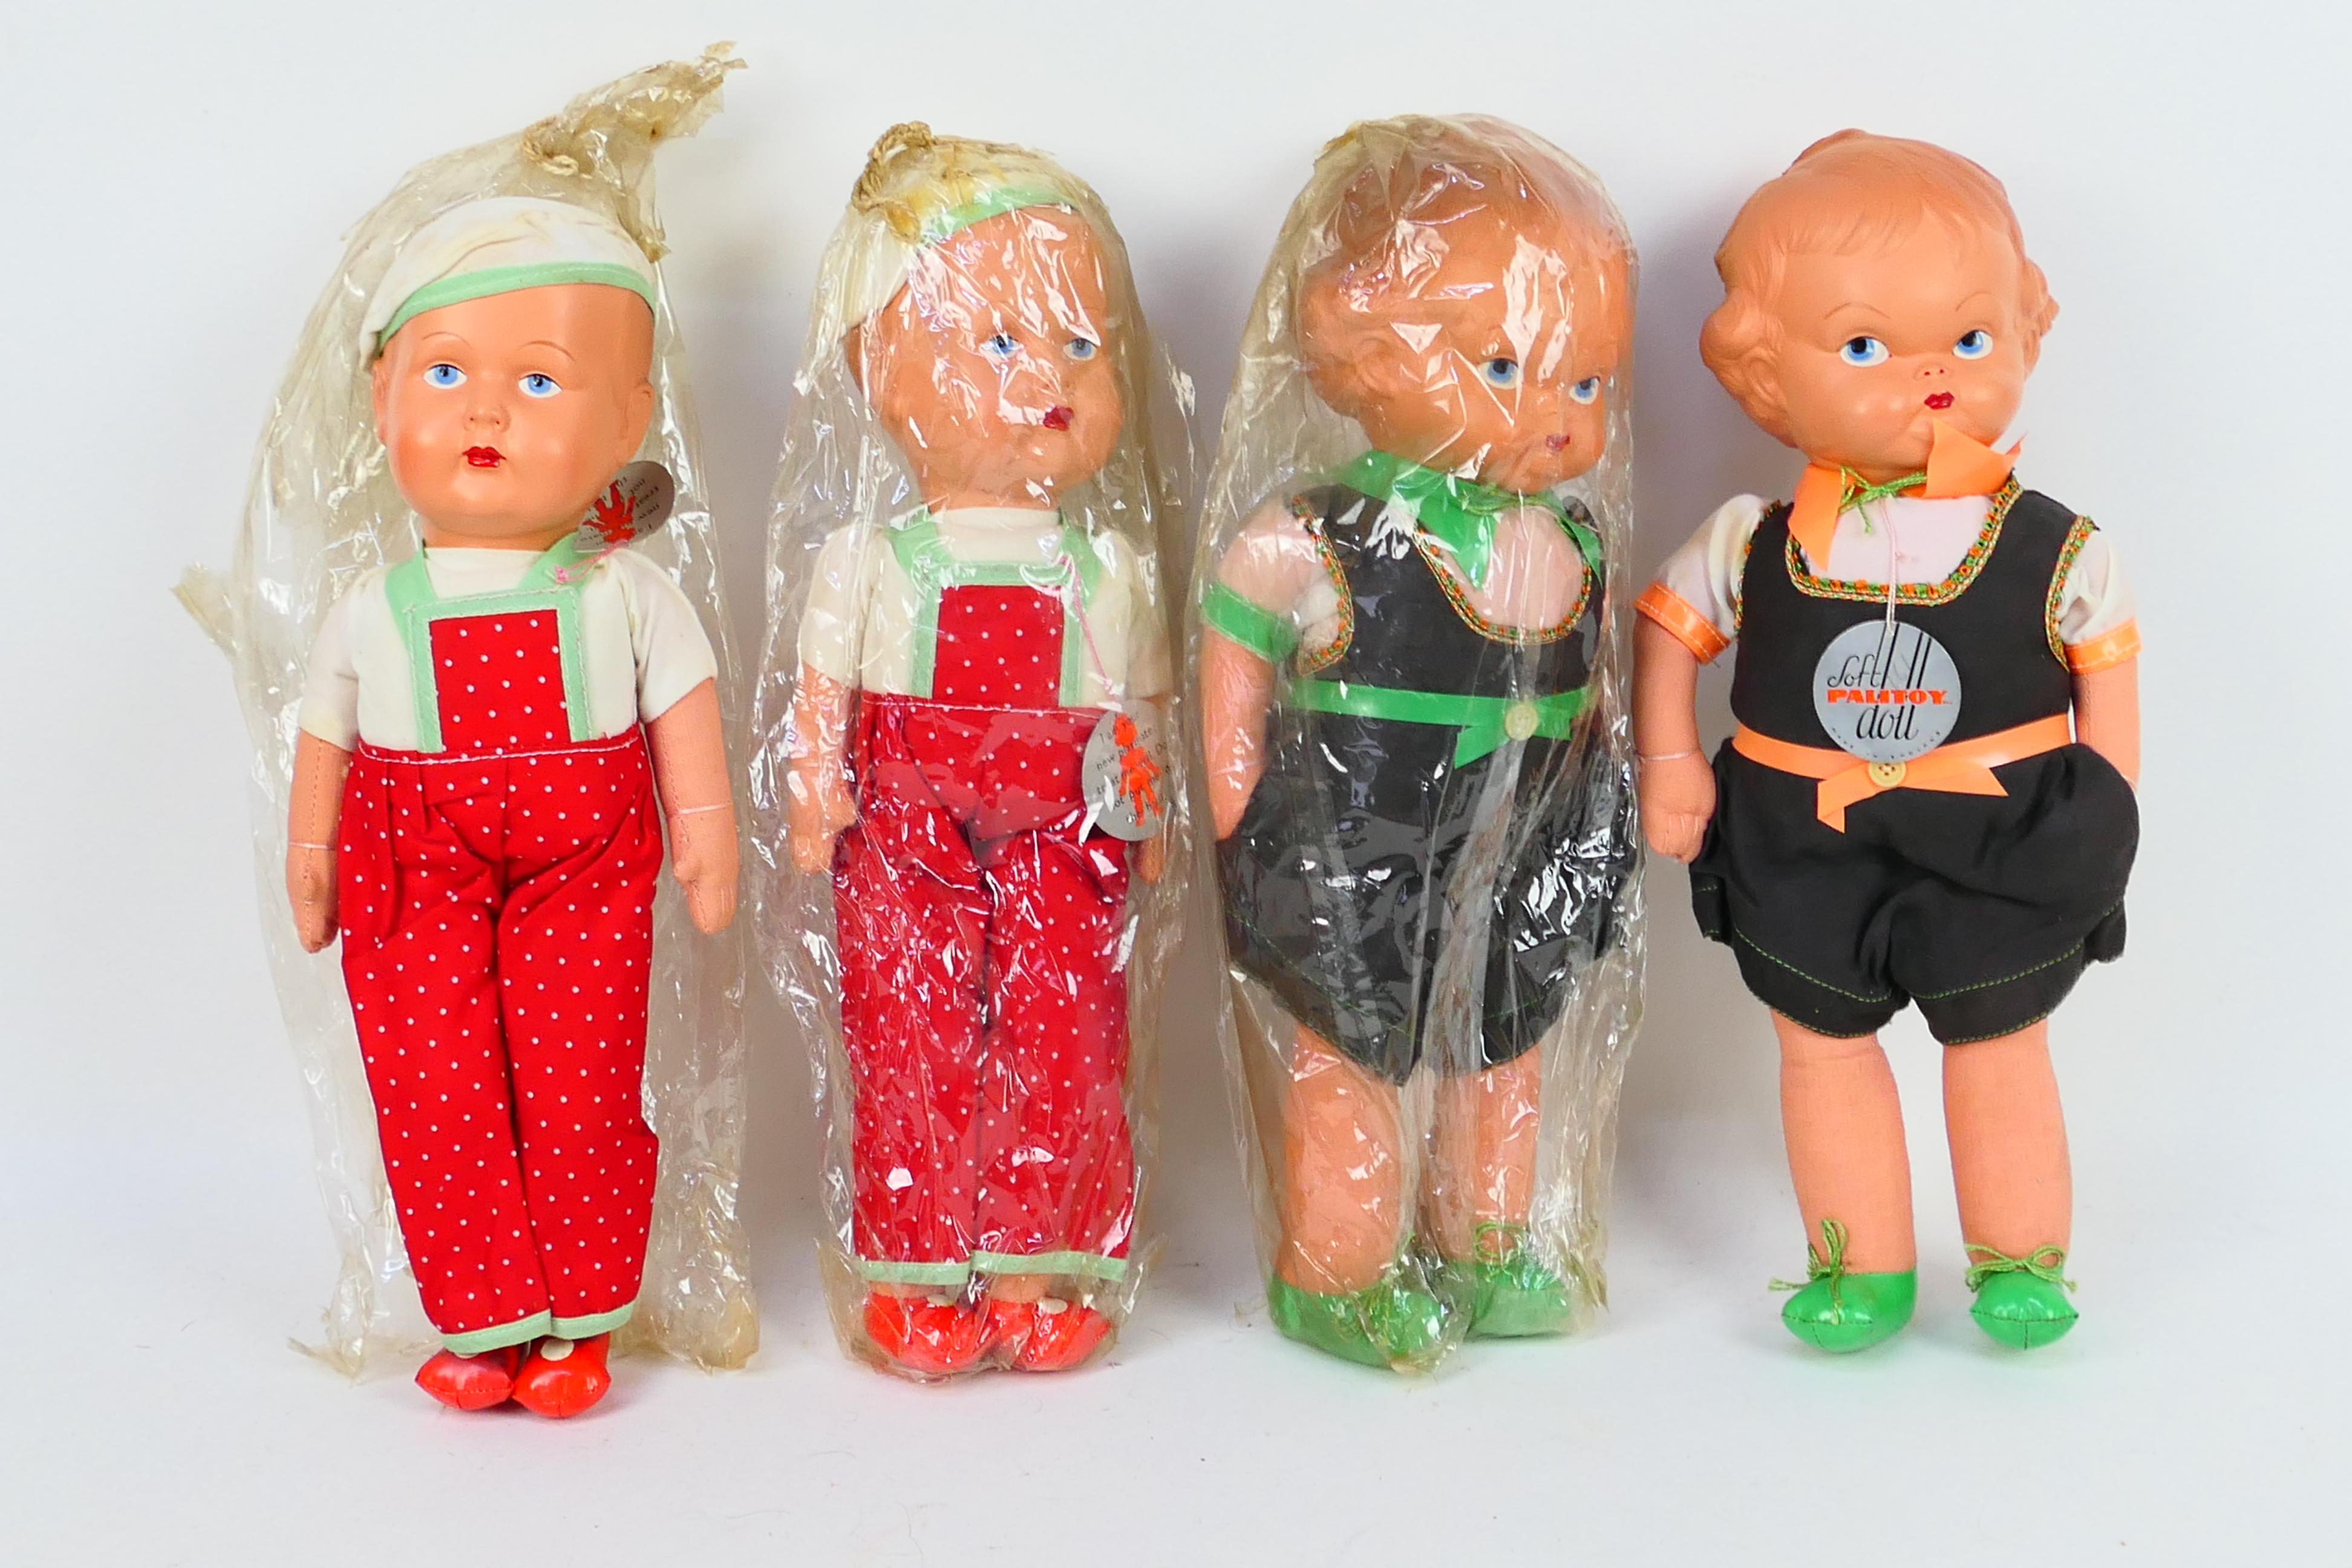 Palitoy - Four bagged Palitoy Soft Dolls. Lot consists of two 14" boy dolls and two 14" girl dolls.